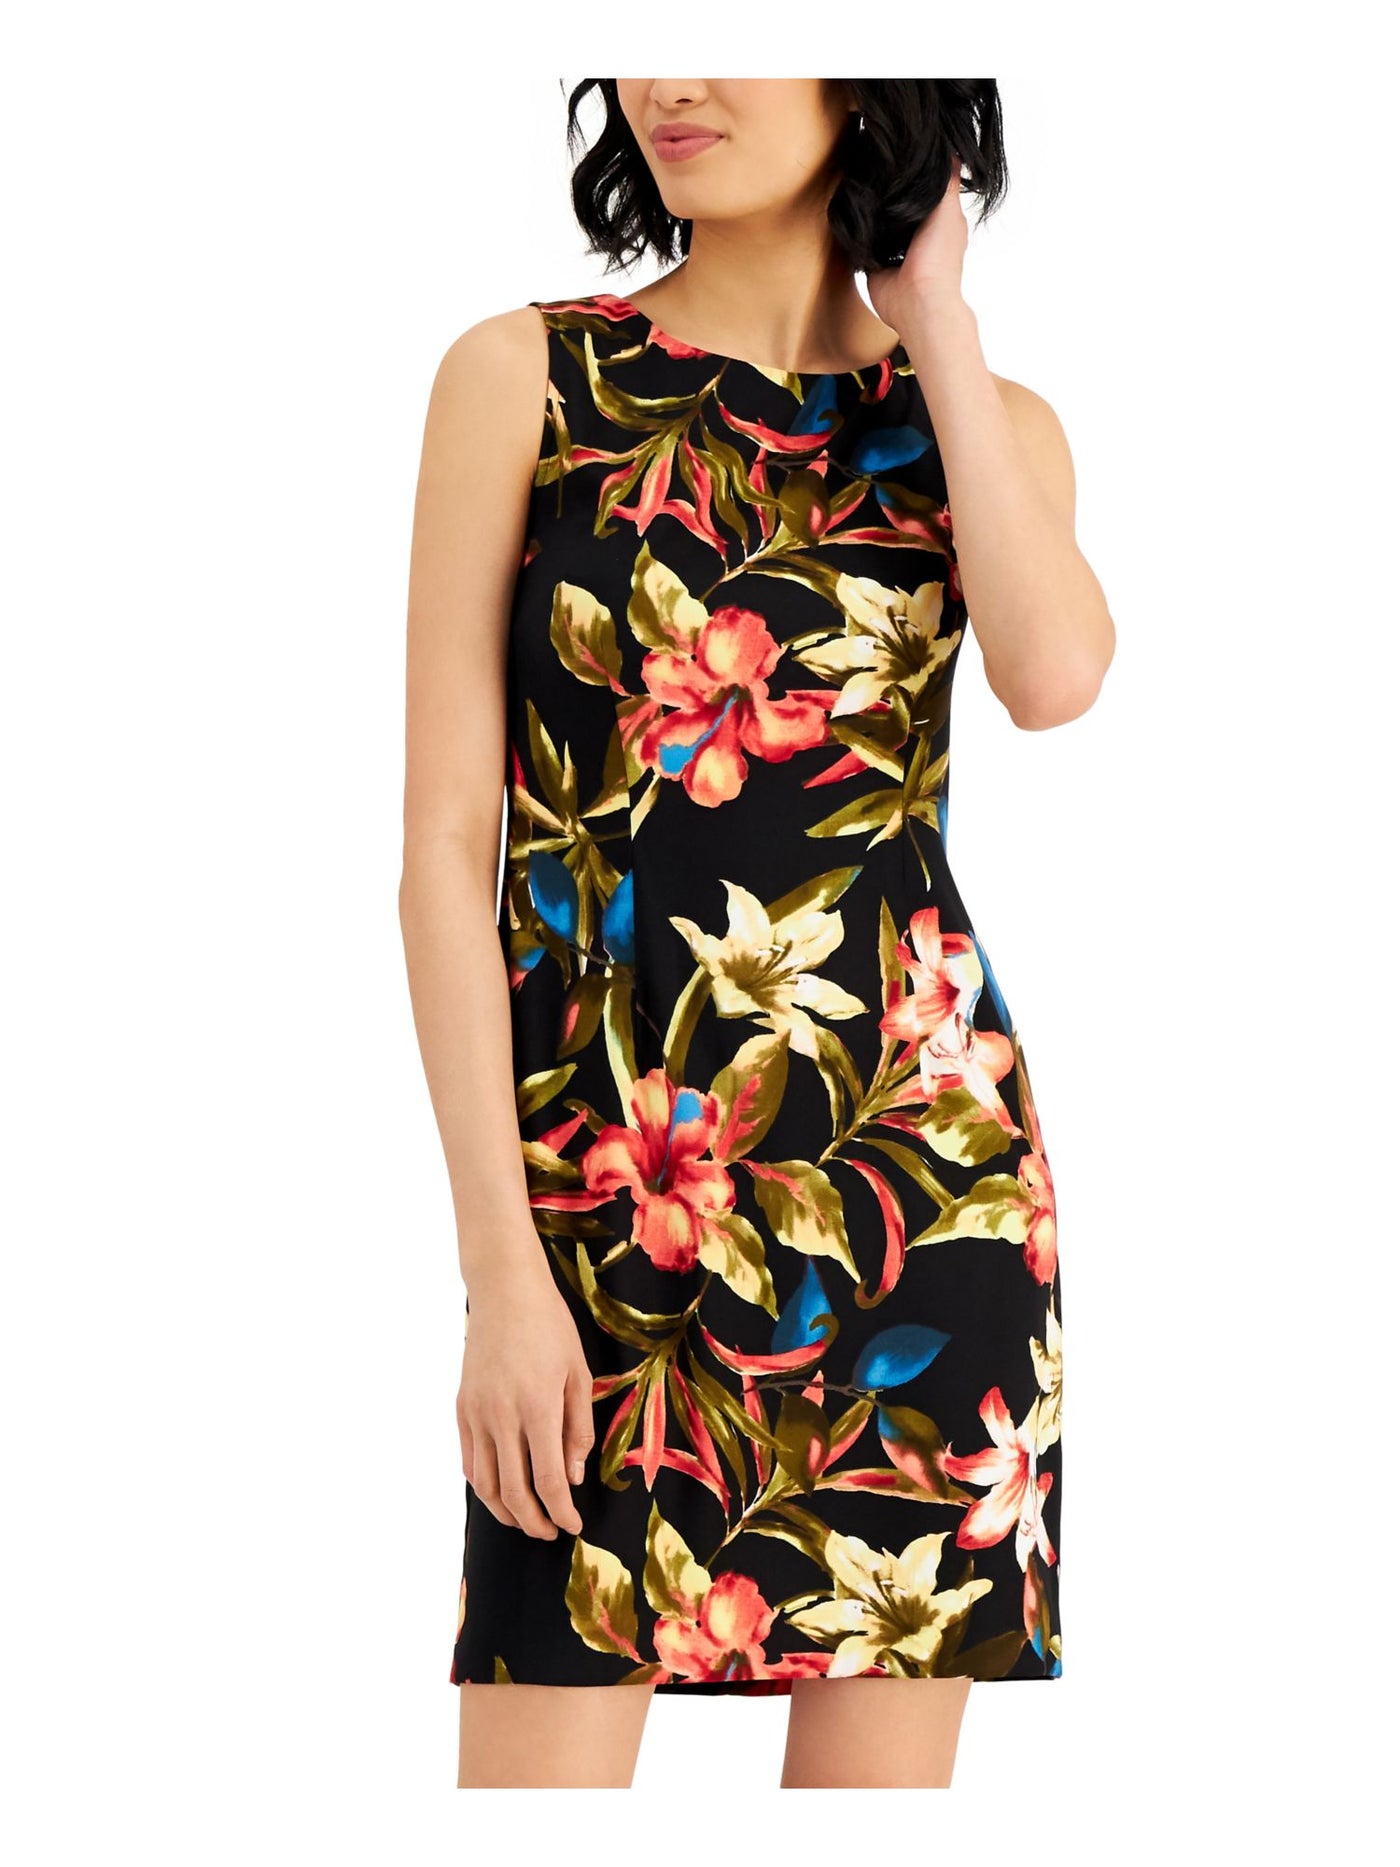 CONNECTED APPAREL Womens Black Zippered Unlined Floral Sleeveless Boat Neck Above The Knee Sheath Dress 4